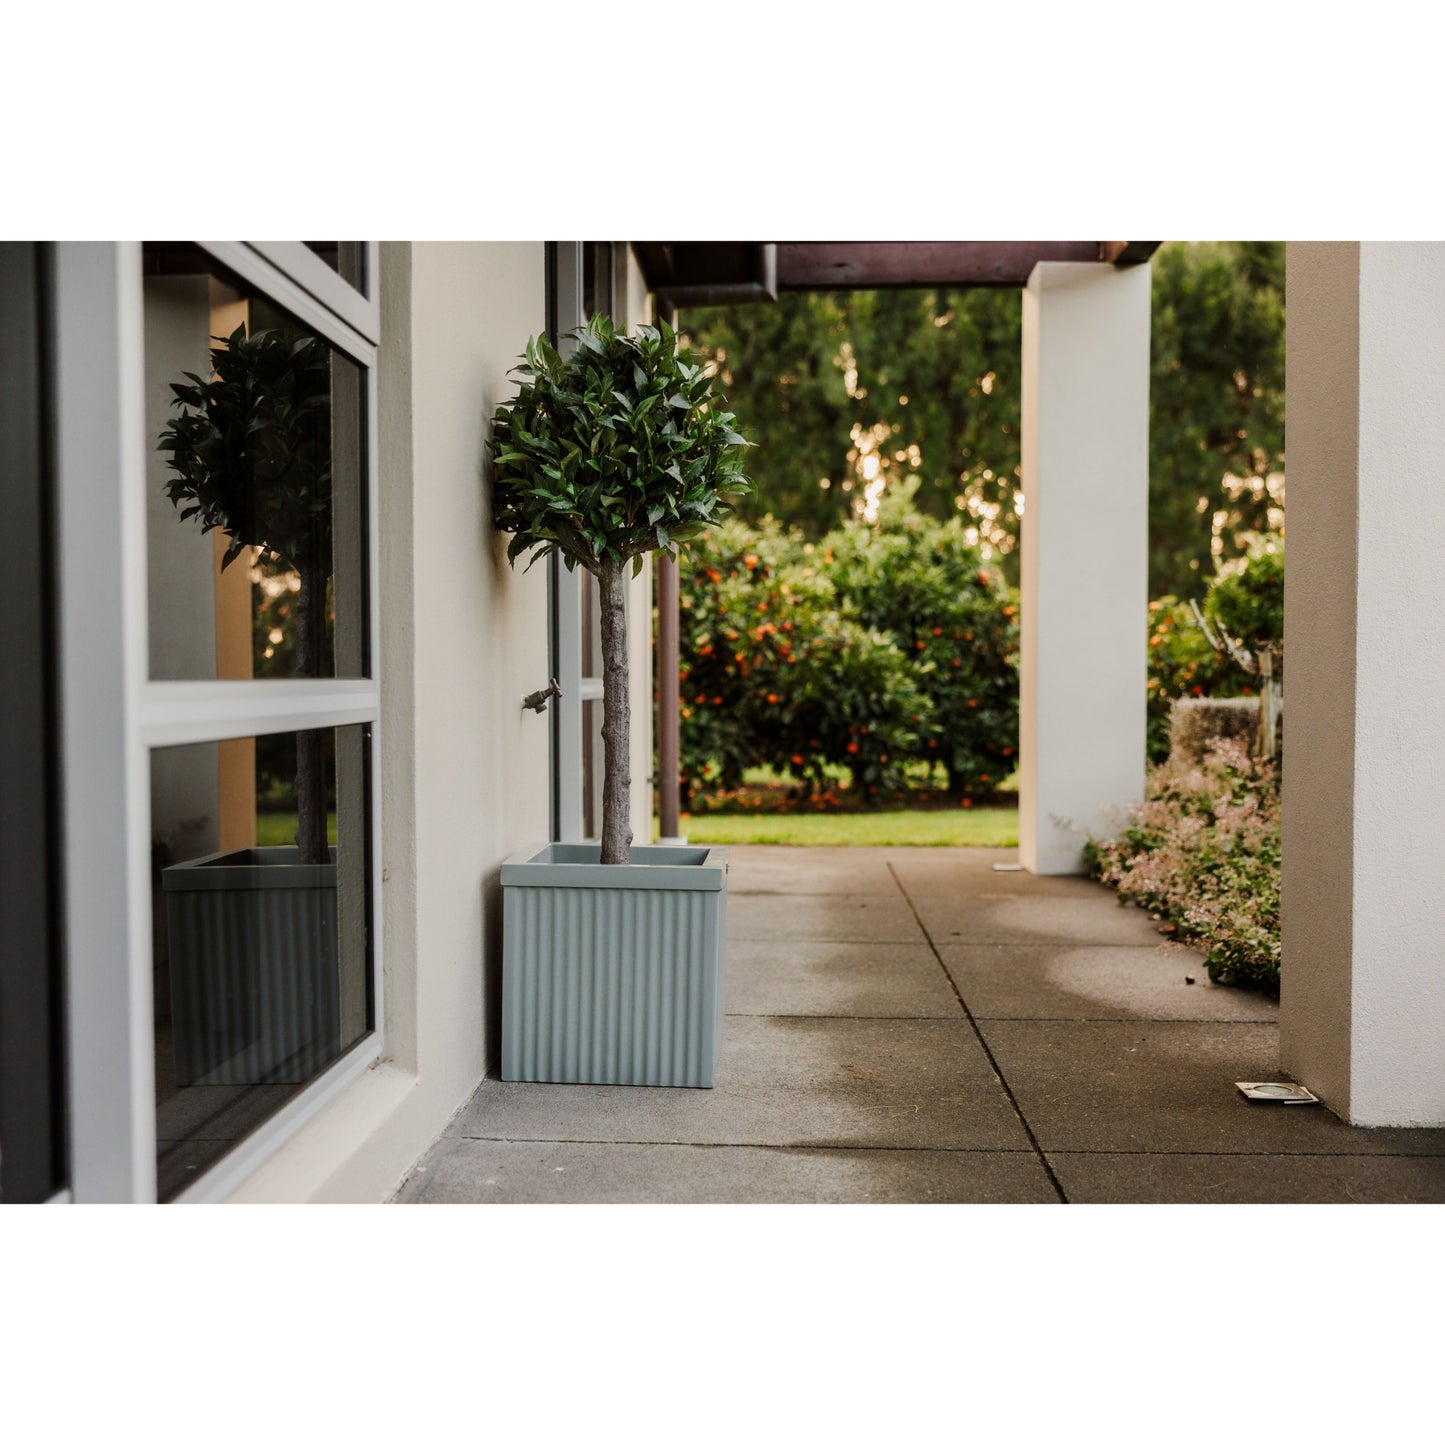 A corrugated square planter made by Modscene is a light grey colour.